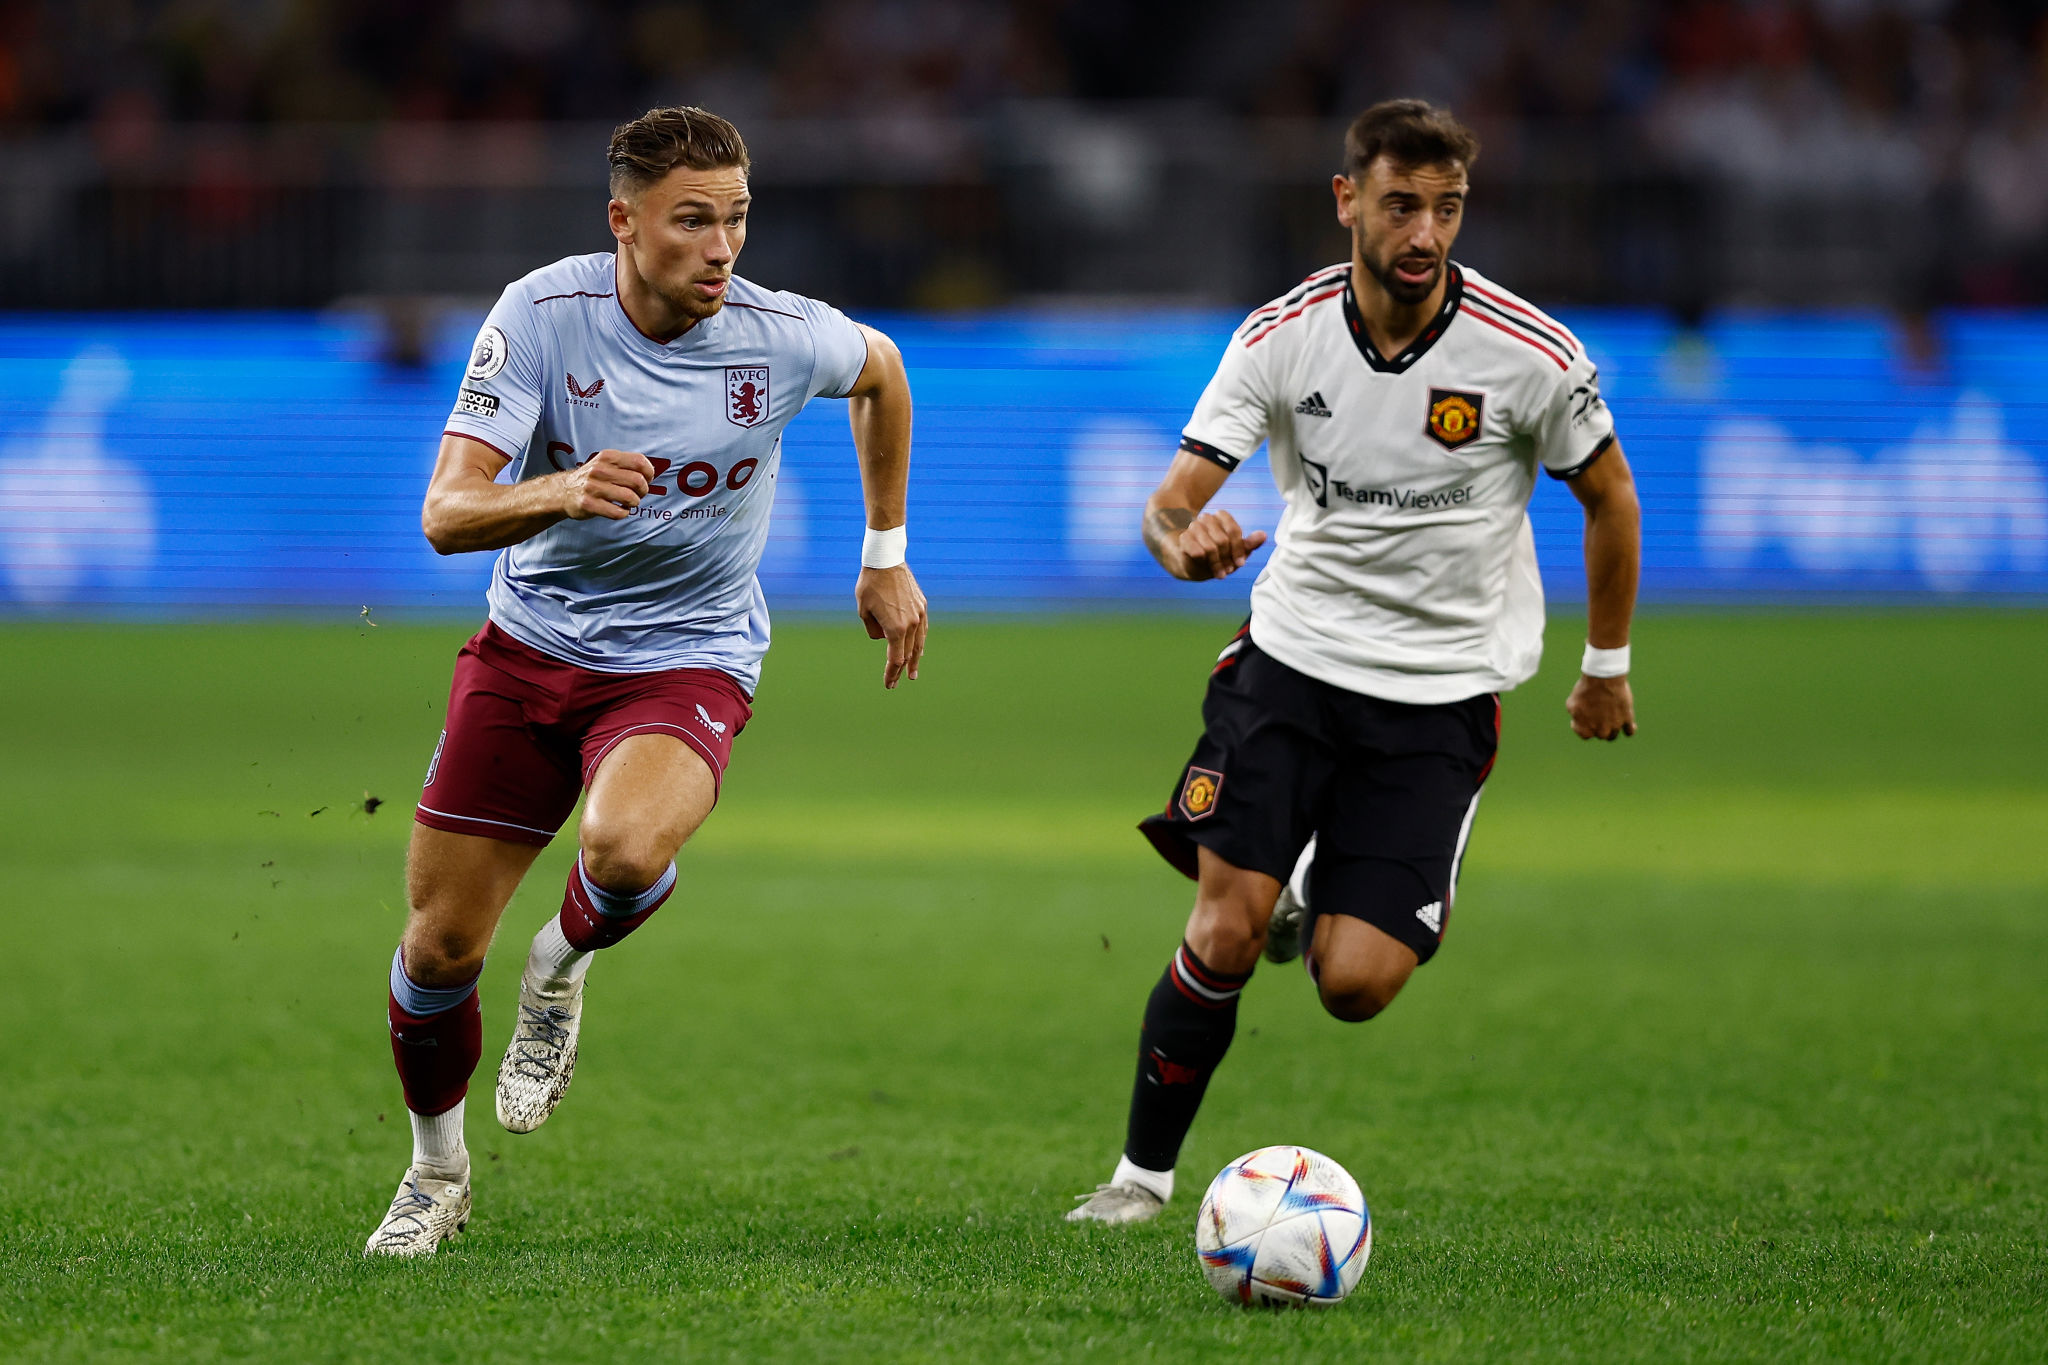 Manchester United vs Aston Villa LIVE: Calum Chambers scores a late equaliser as United draw 2-2 against Villa, Check Man United vs Aston Villa HIGHLIGHTS